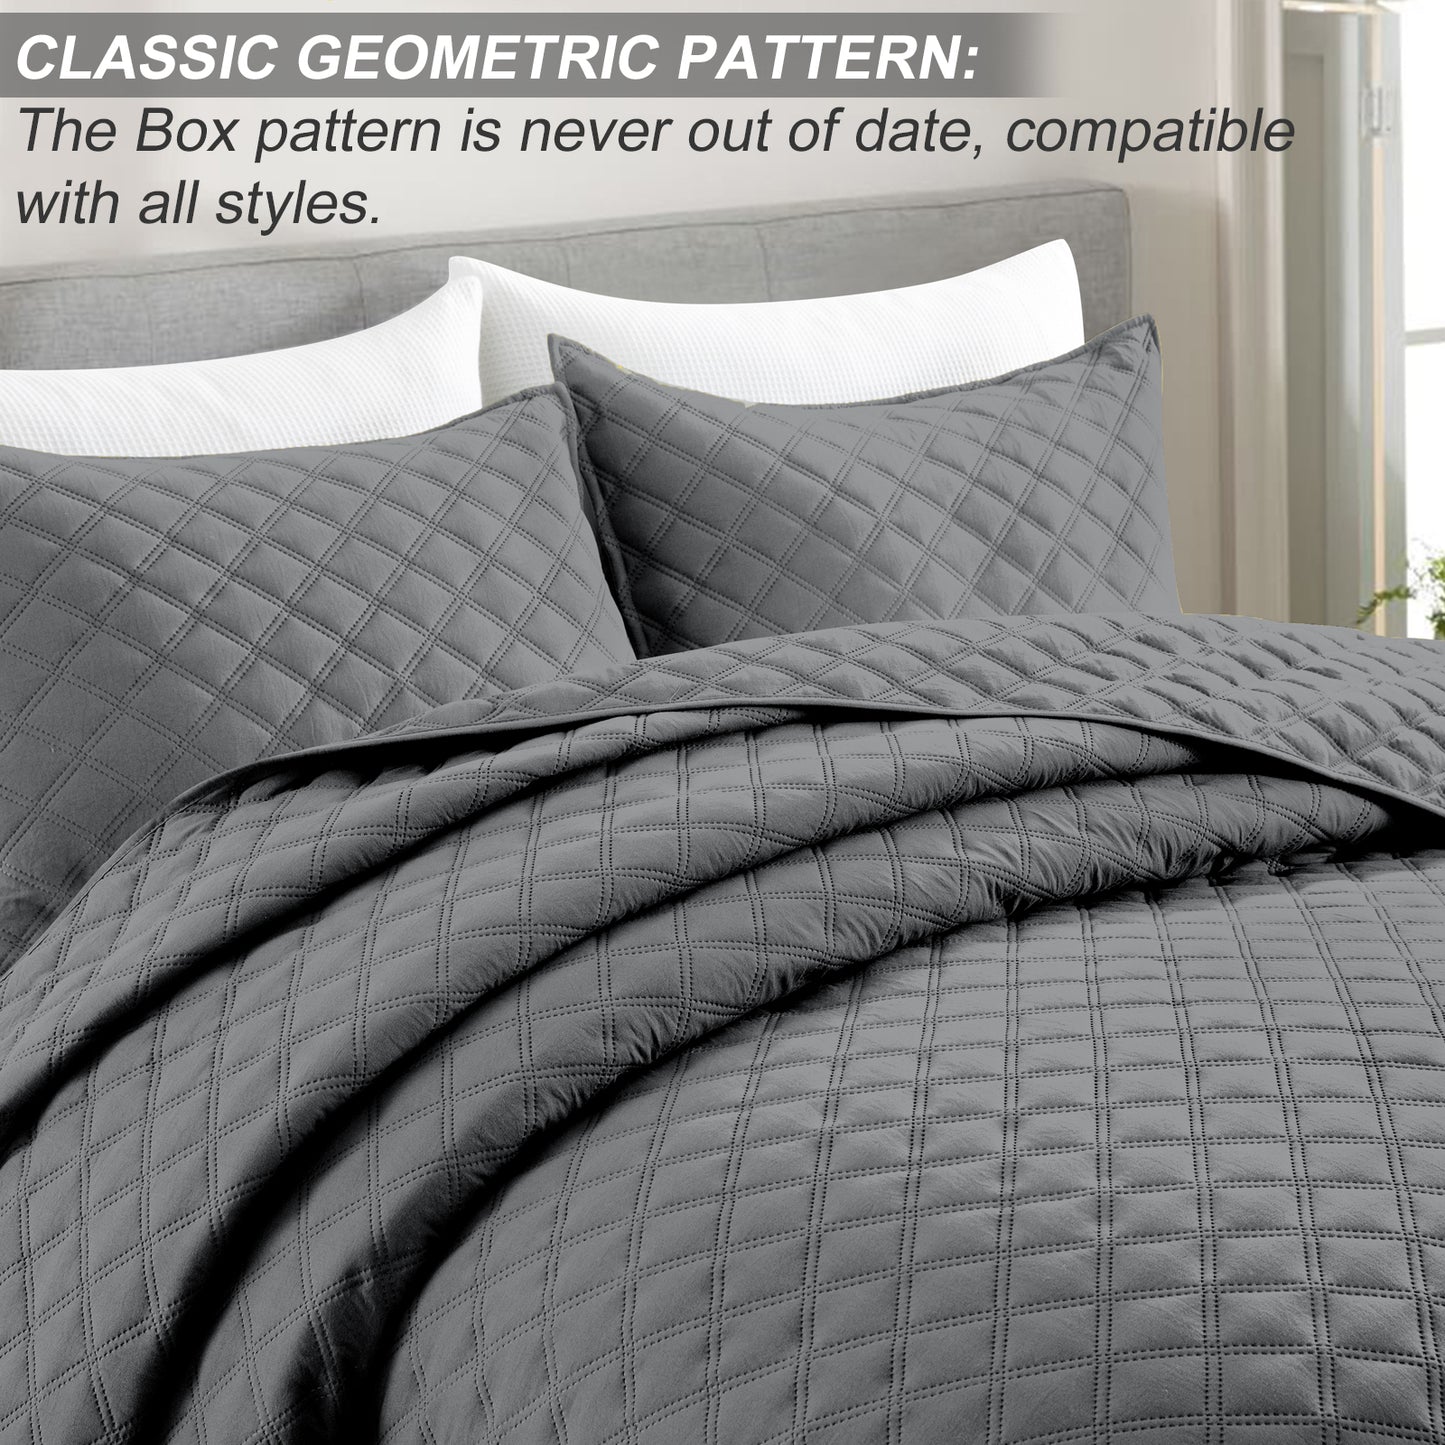 Exclusivo Mezcla 2-Piece Gray Twin Size Quilt Set, Box Pattern Ultrasonic Lightweight and Soft Quilts/Bedspreads/Coverlets/Bedding Set (1 Quilt, 1 Pillow Sham) for All Seasons